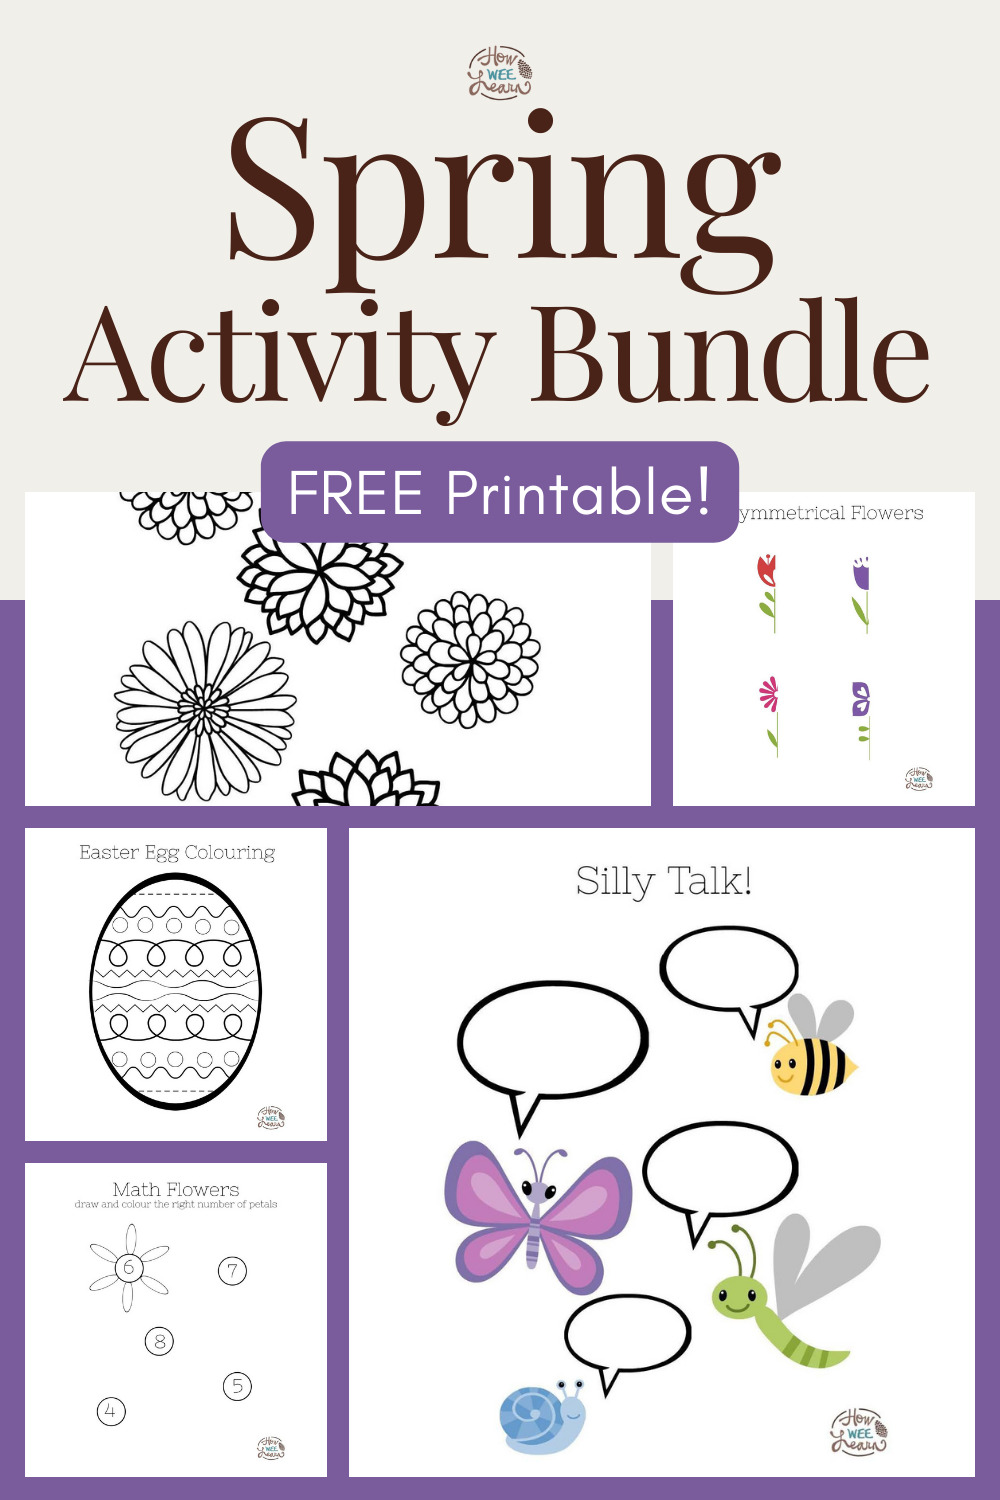 Spring Activity Bundle with FREE Printable!